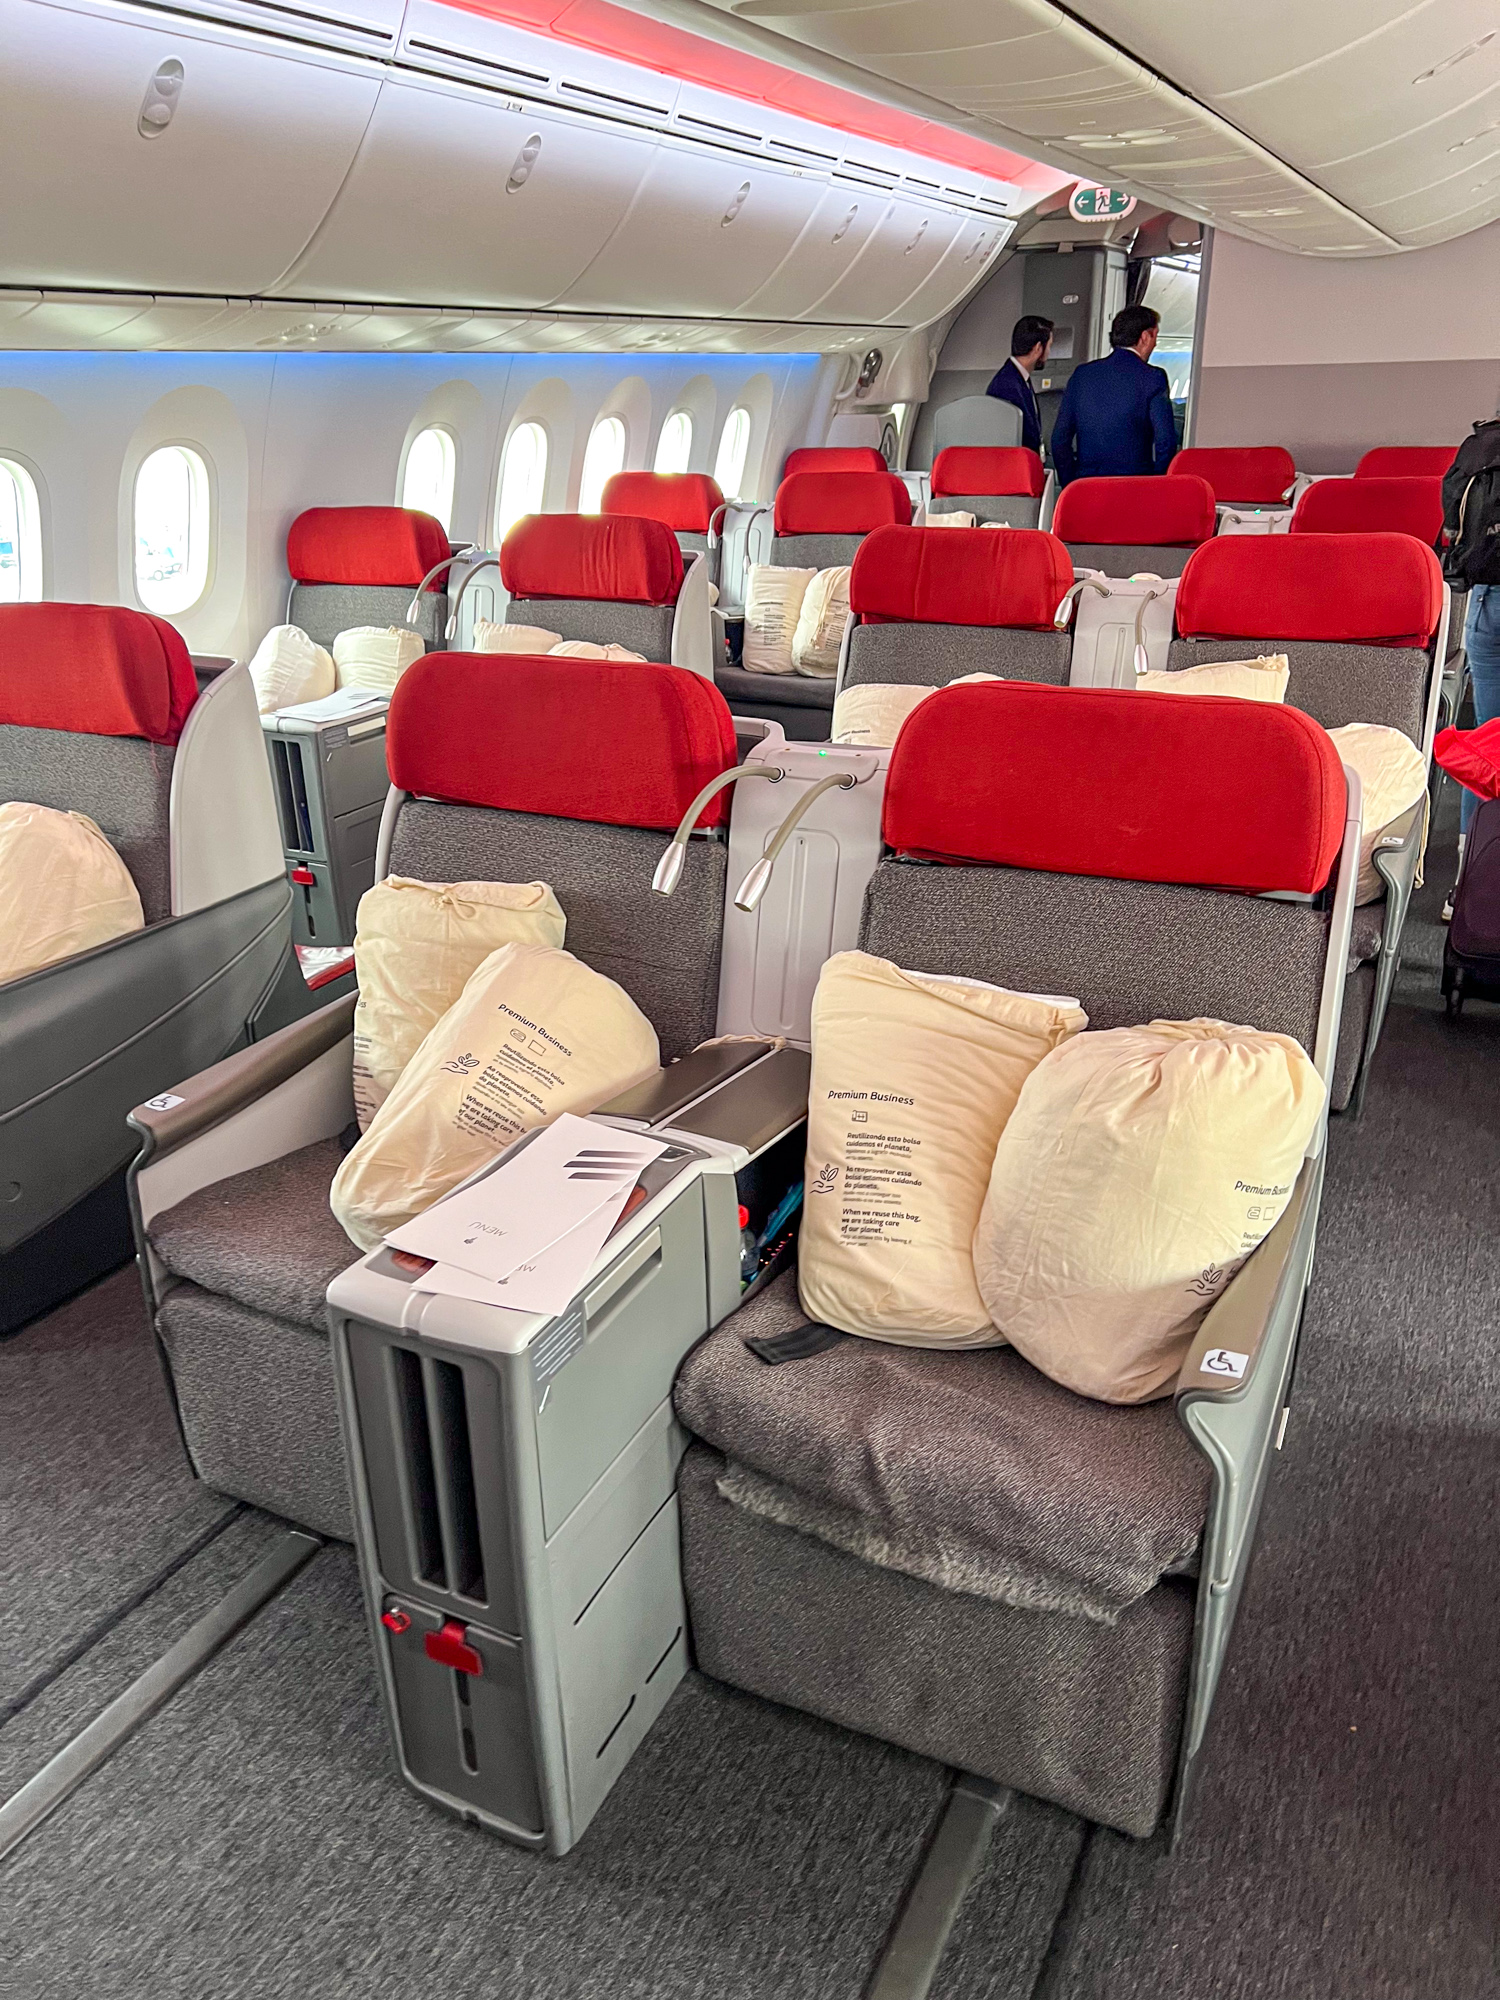 LATAM 787 Business Class cabin for the flight from Santiago to Easter Island.